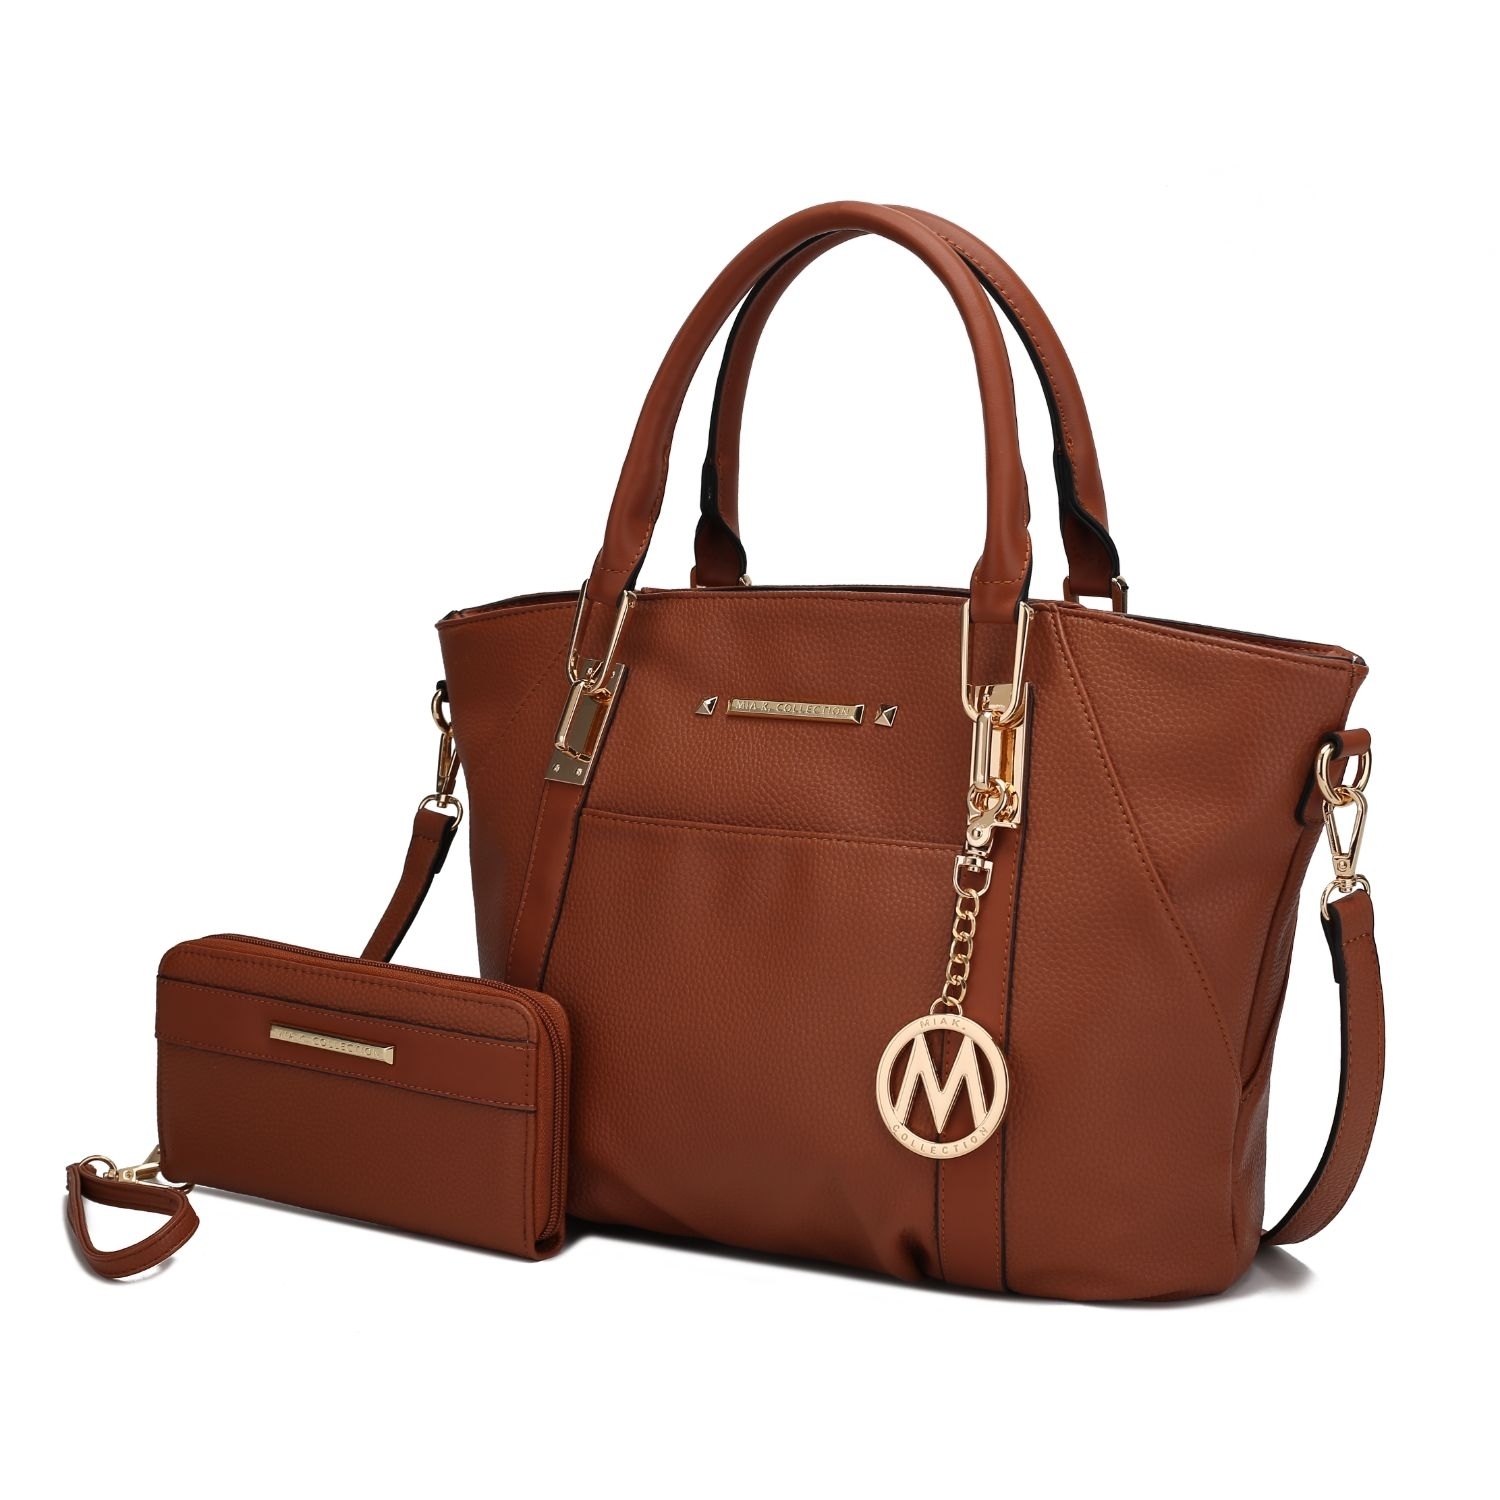 MKF Collection Darielle Satchel Handbag With Wallet By Mia K. - Pewter